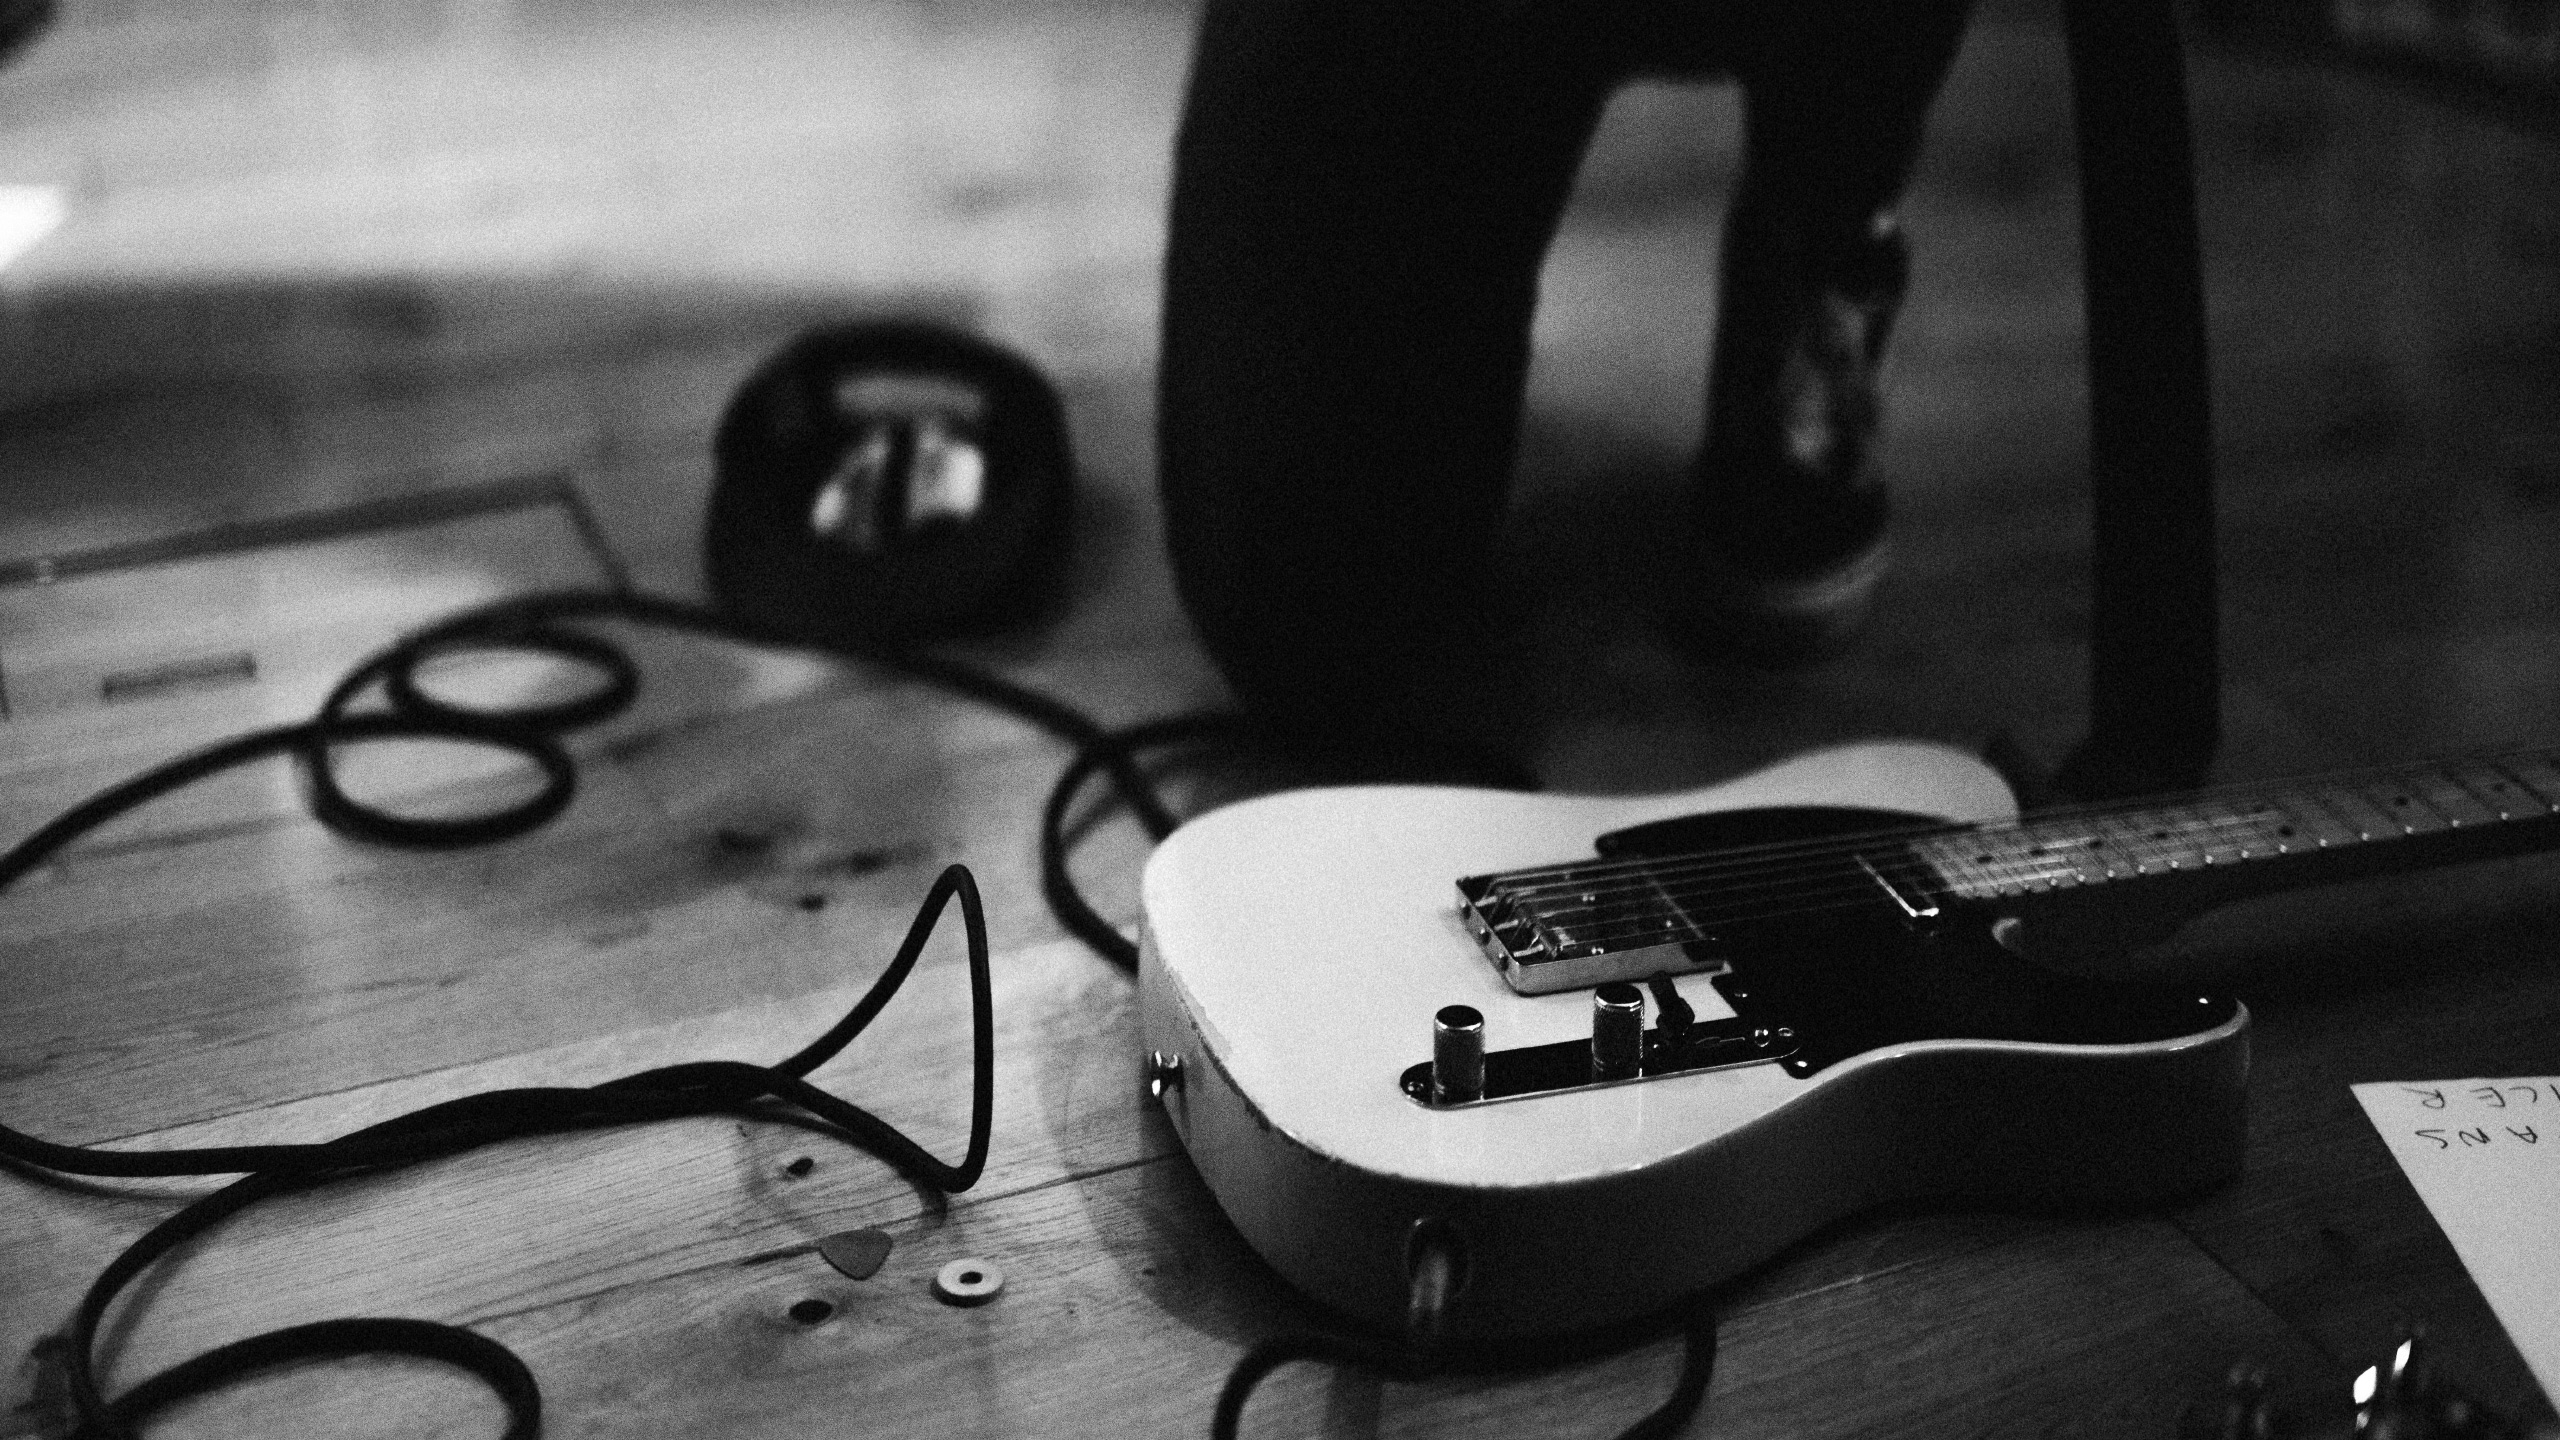 A guitar on the floor with cables